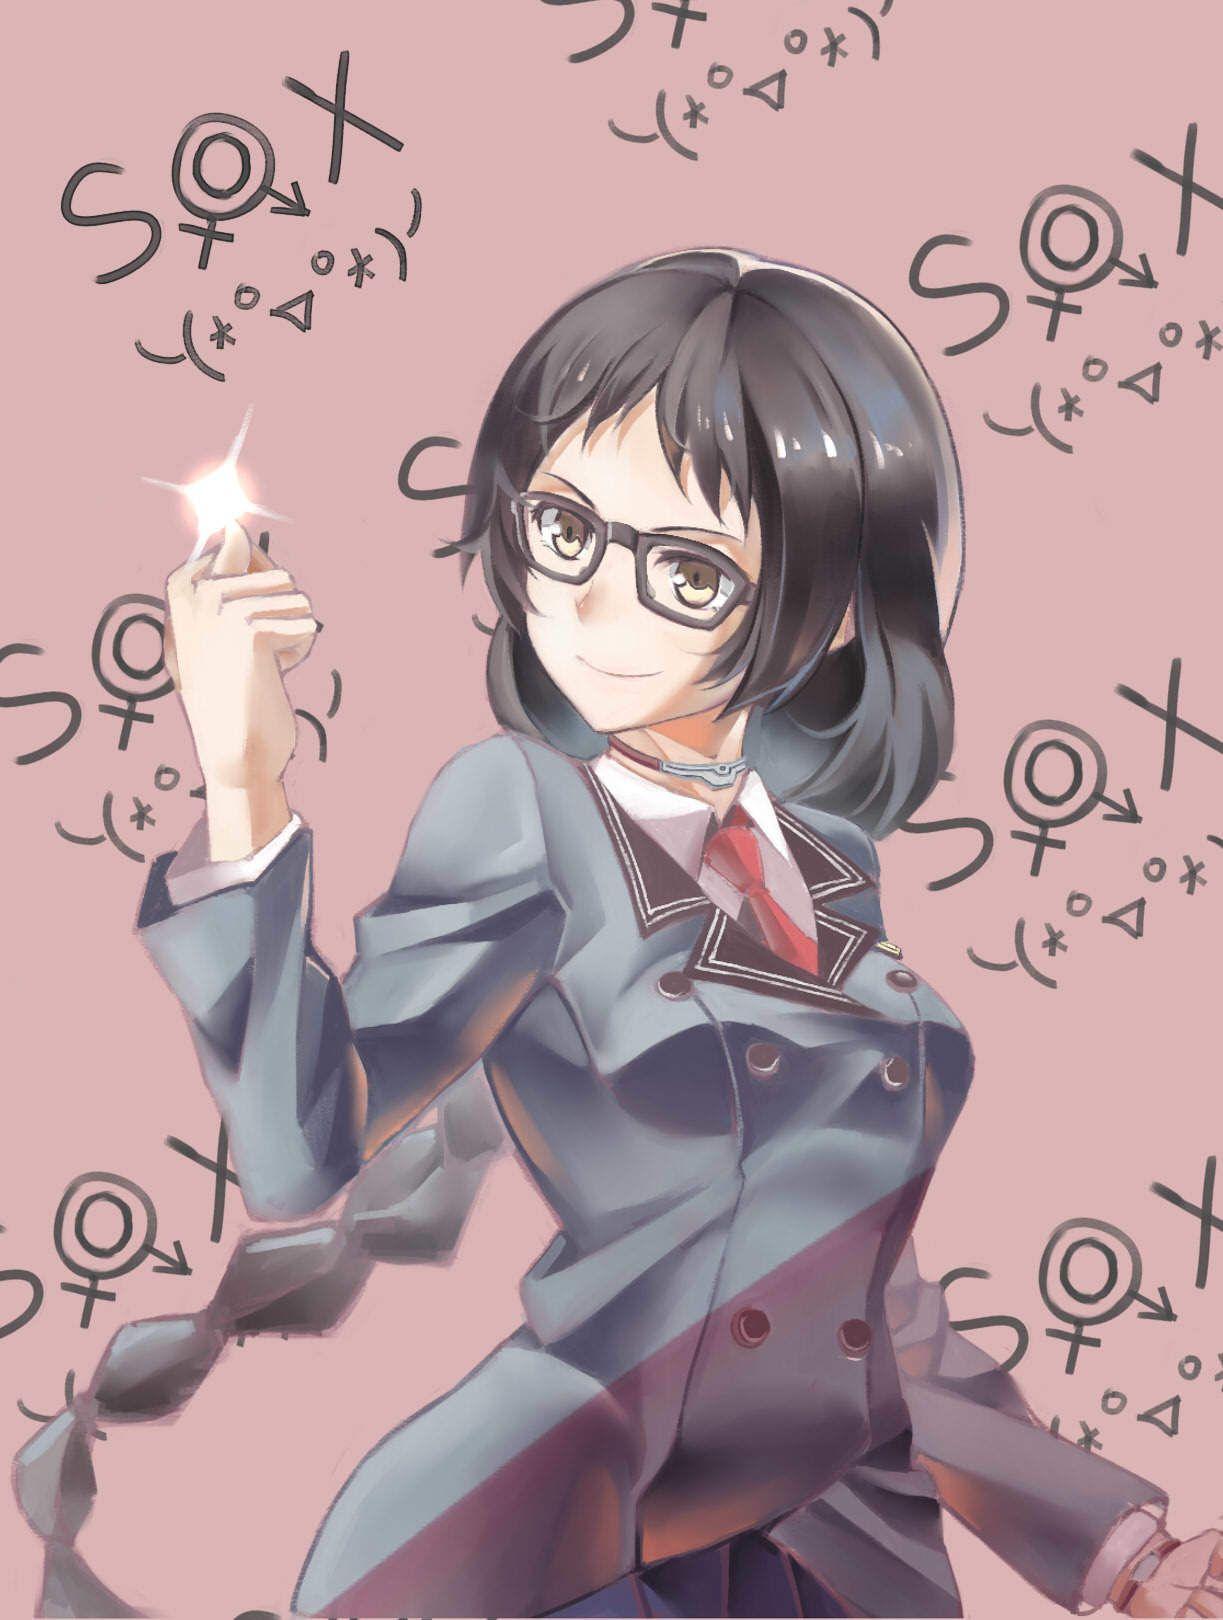 SHIMONETA: A Boring World Where the Concept of Dirty Jokes Doesn't Exist  (English Dub) What SOX Created - Watch on Crunchyroll